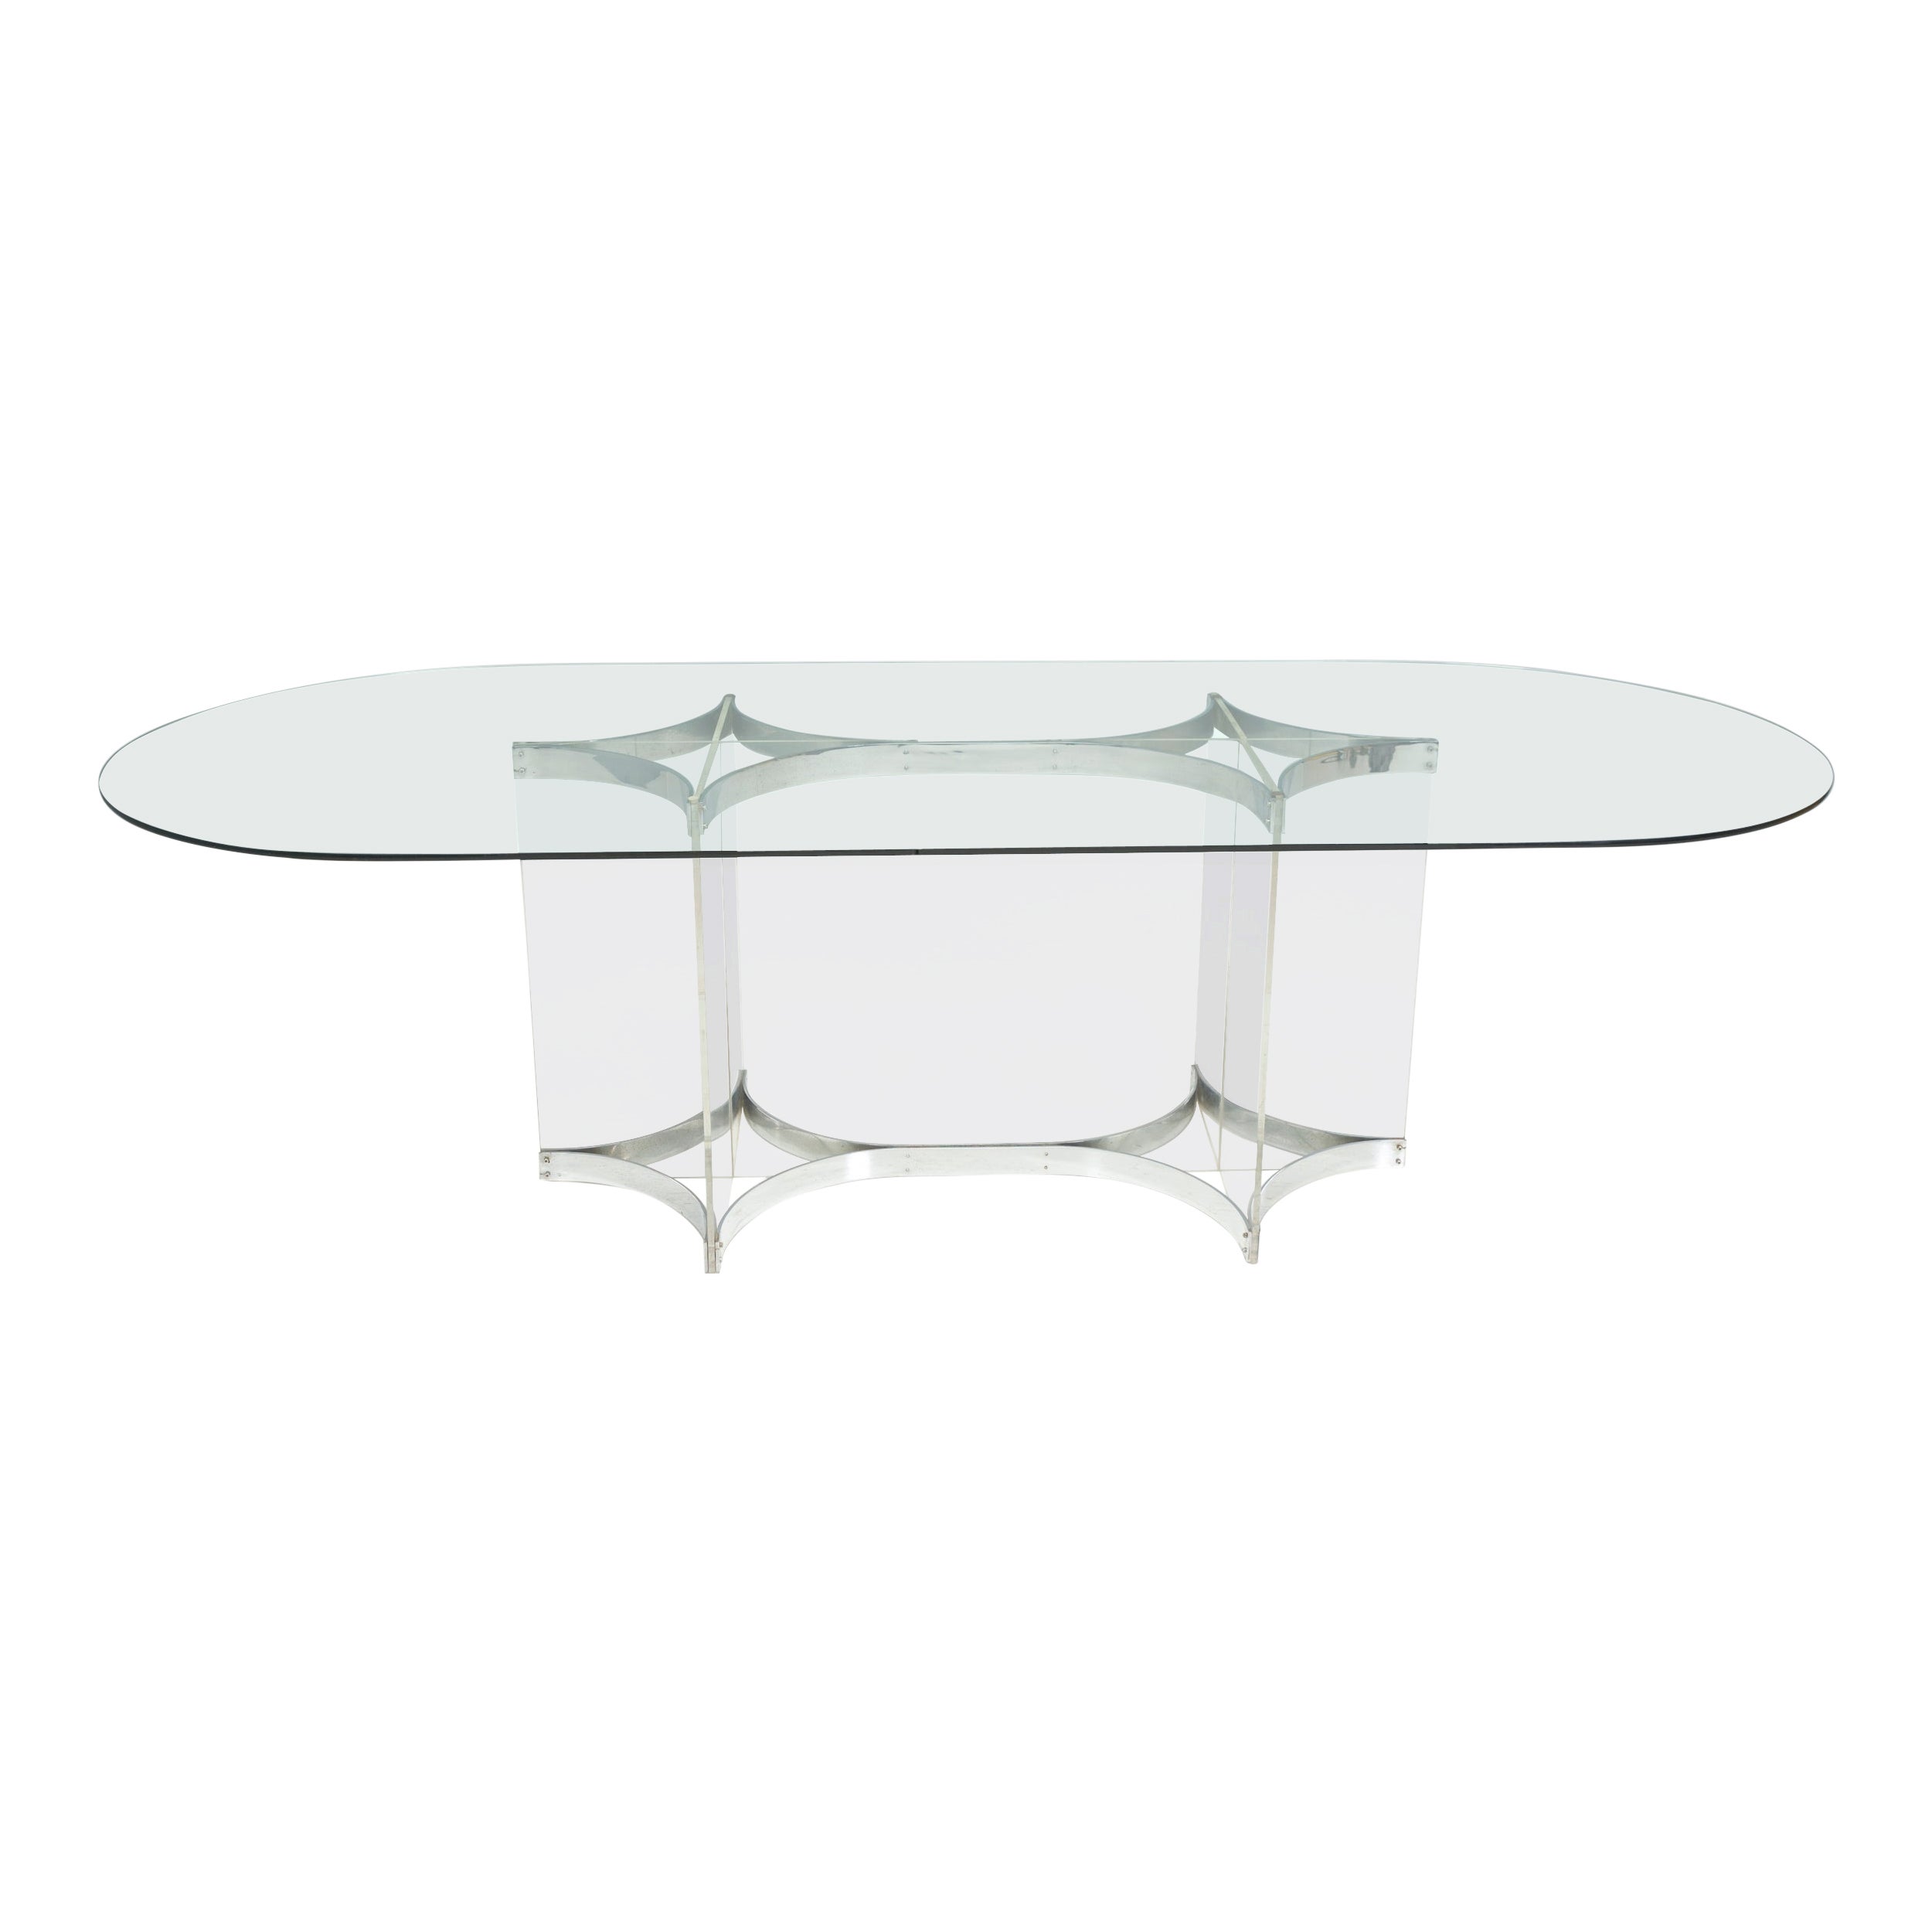 Alessandro Albrizzi Dining Room Tables